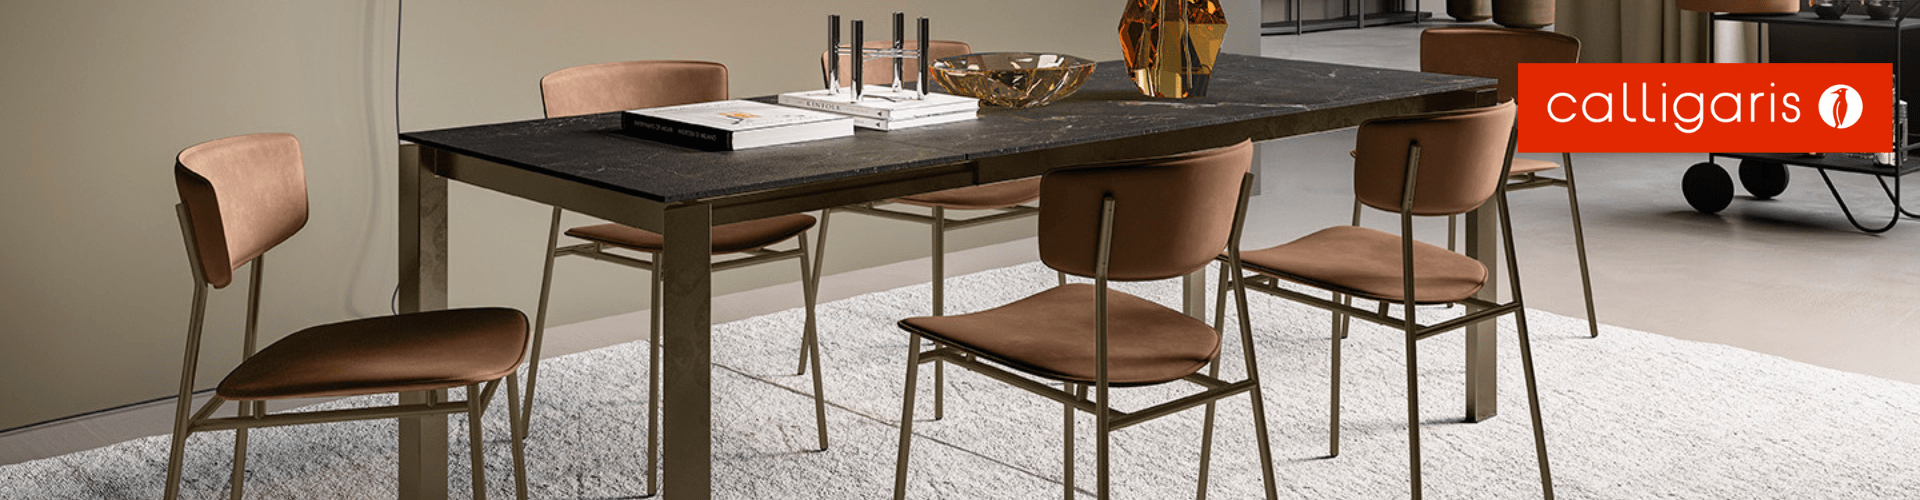 Calligaris Duca Collections Banner 